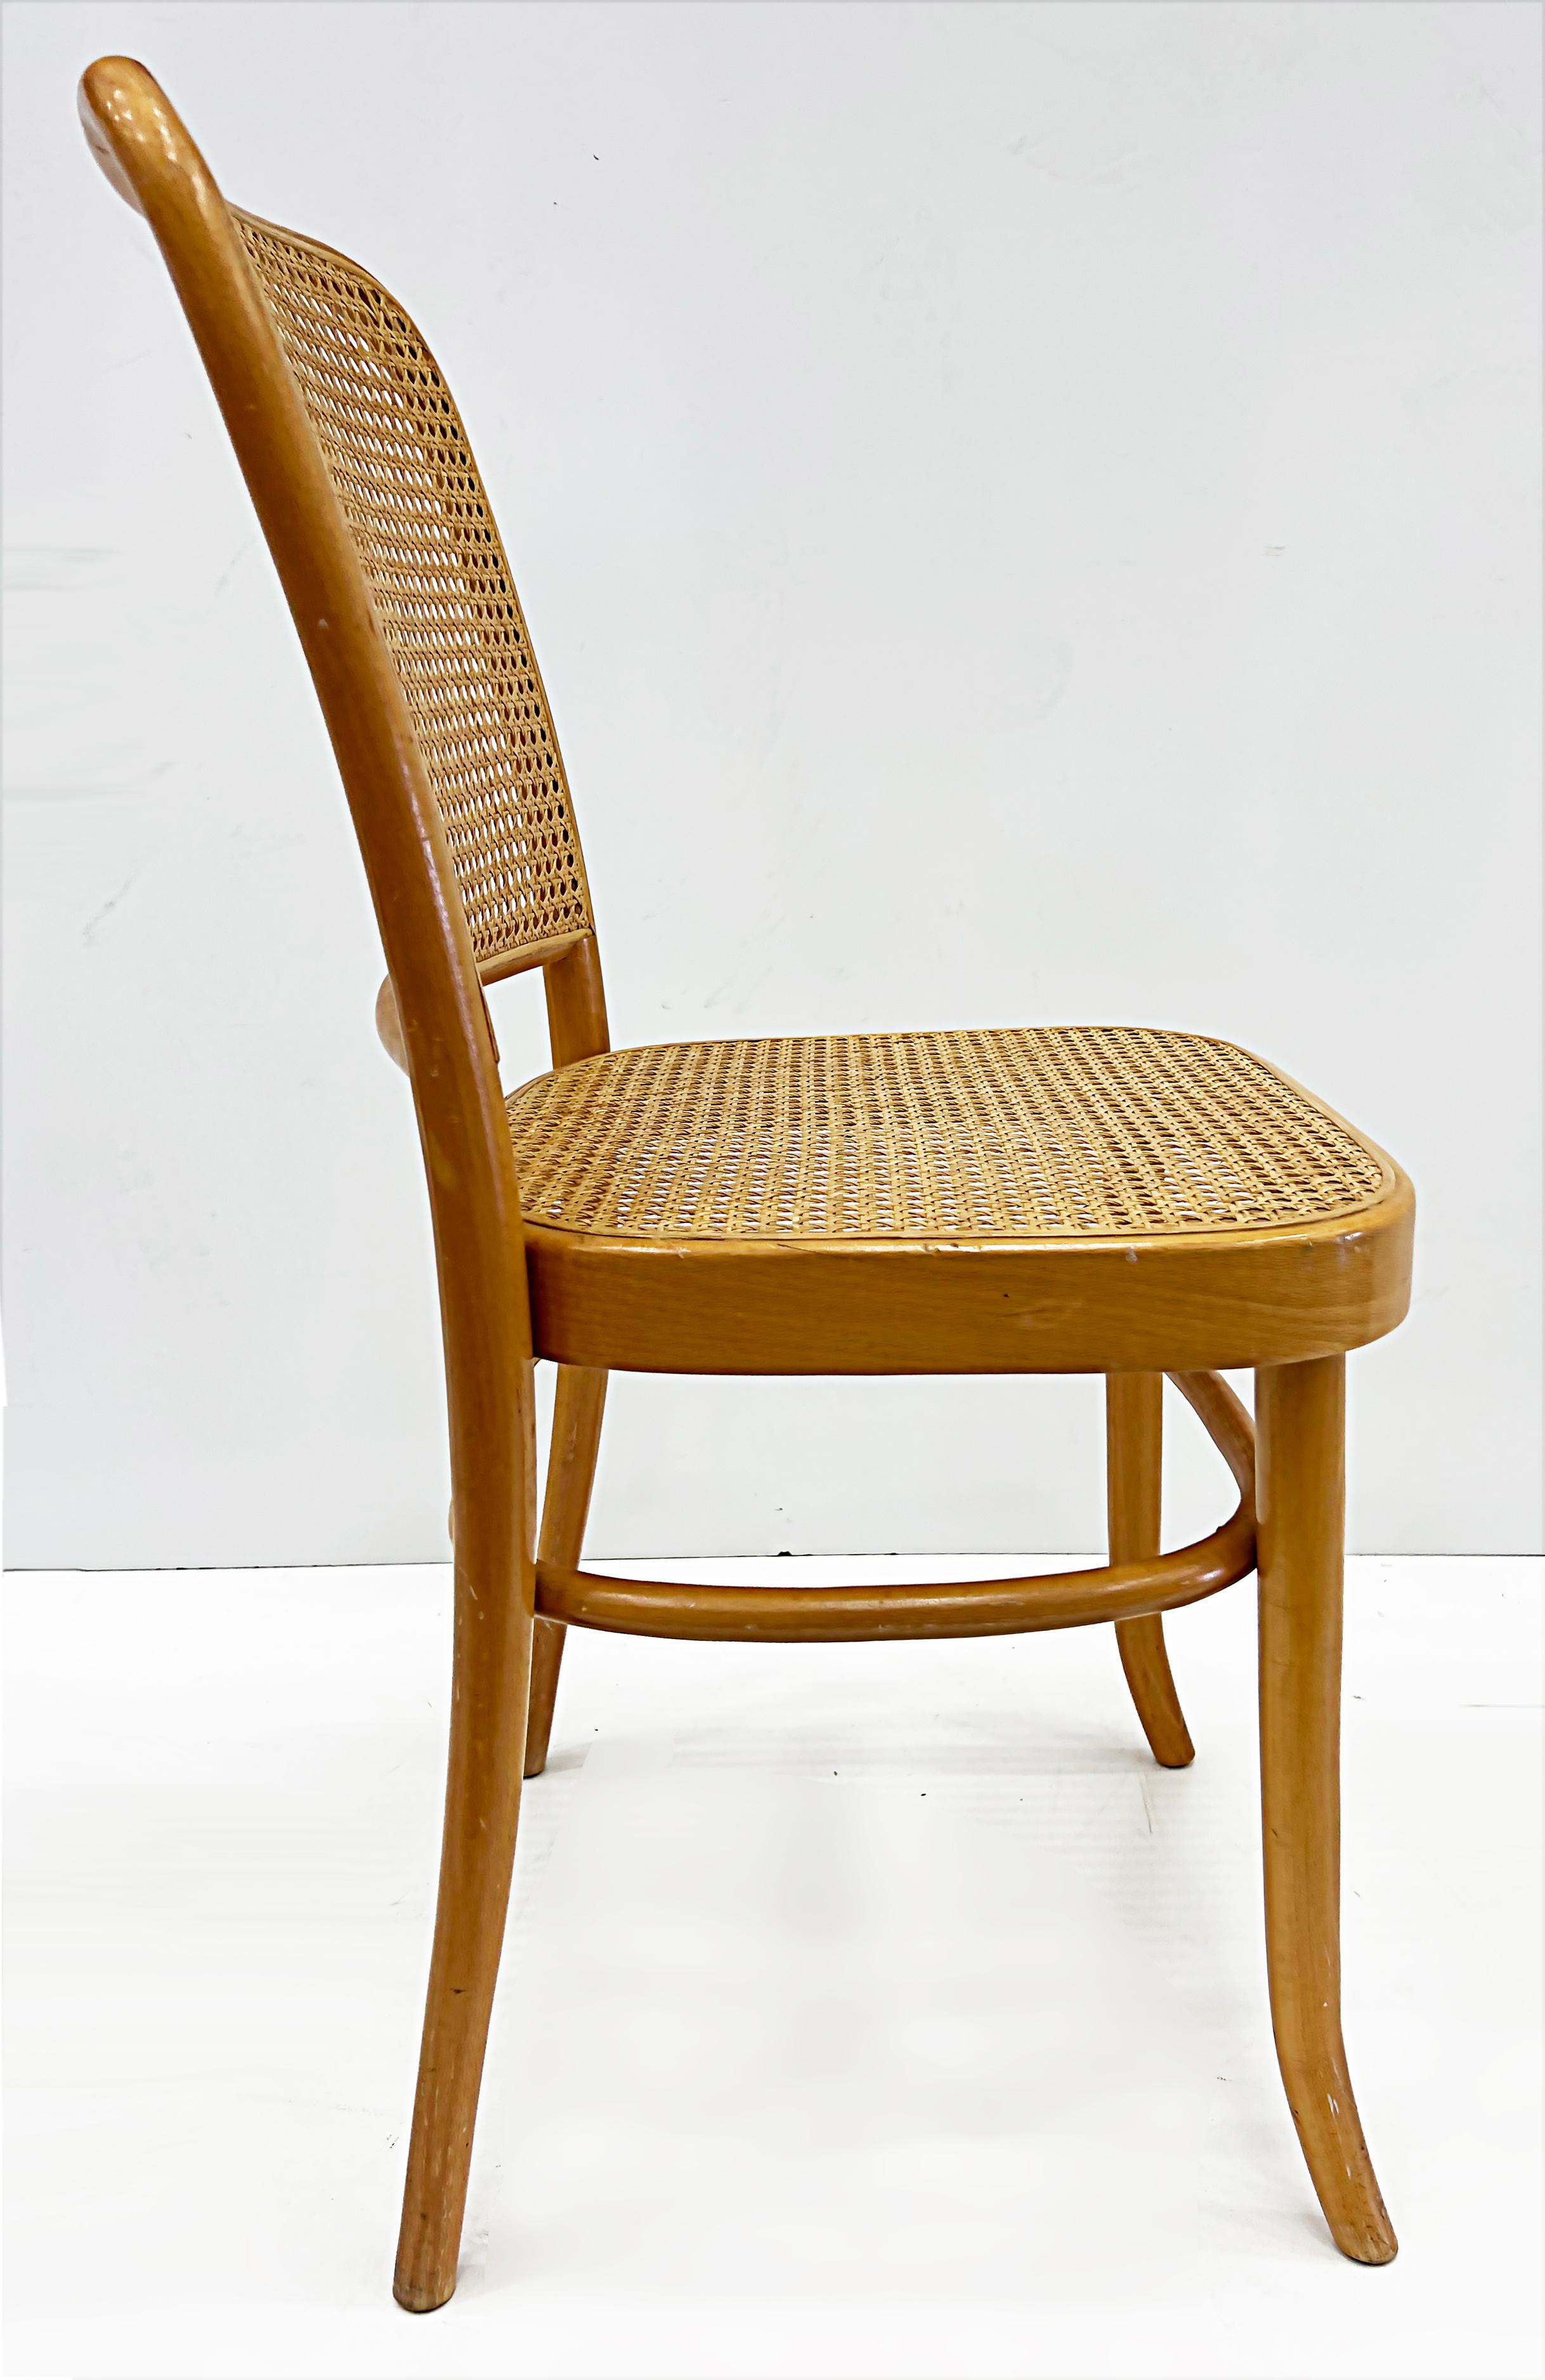 vintage bentwood cane chairs